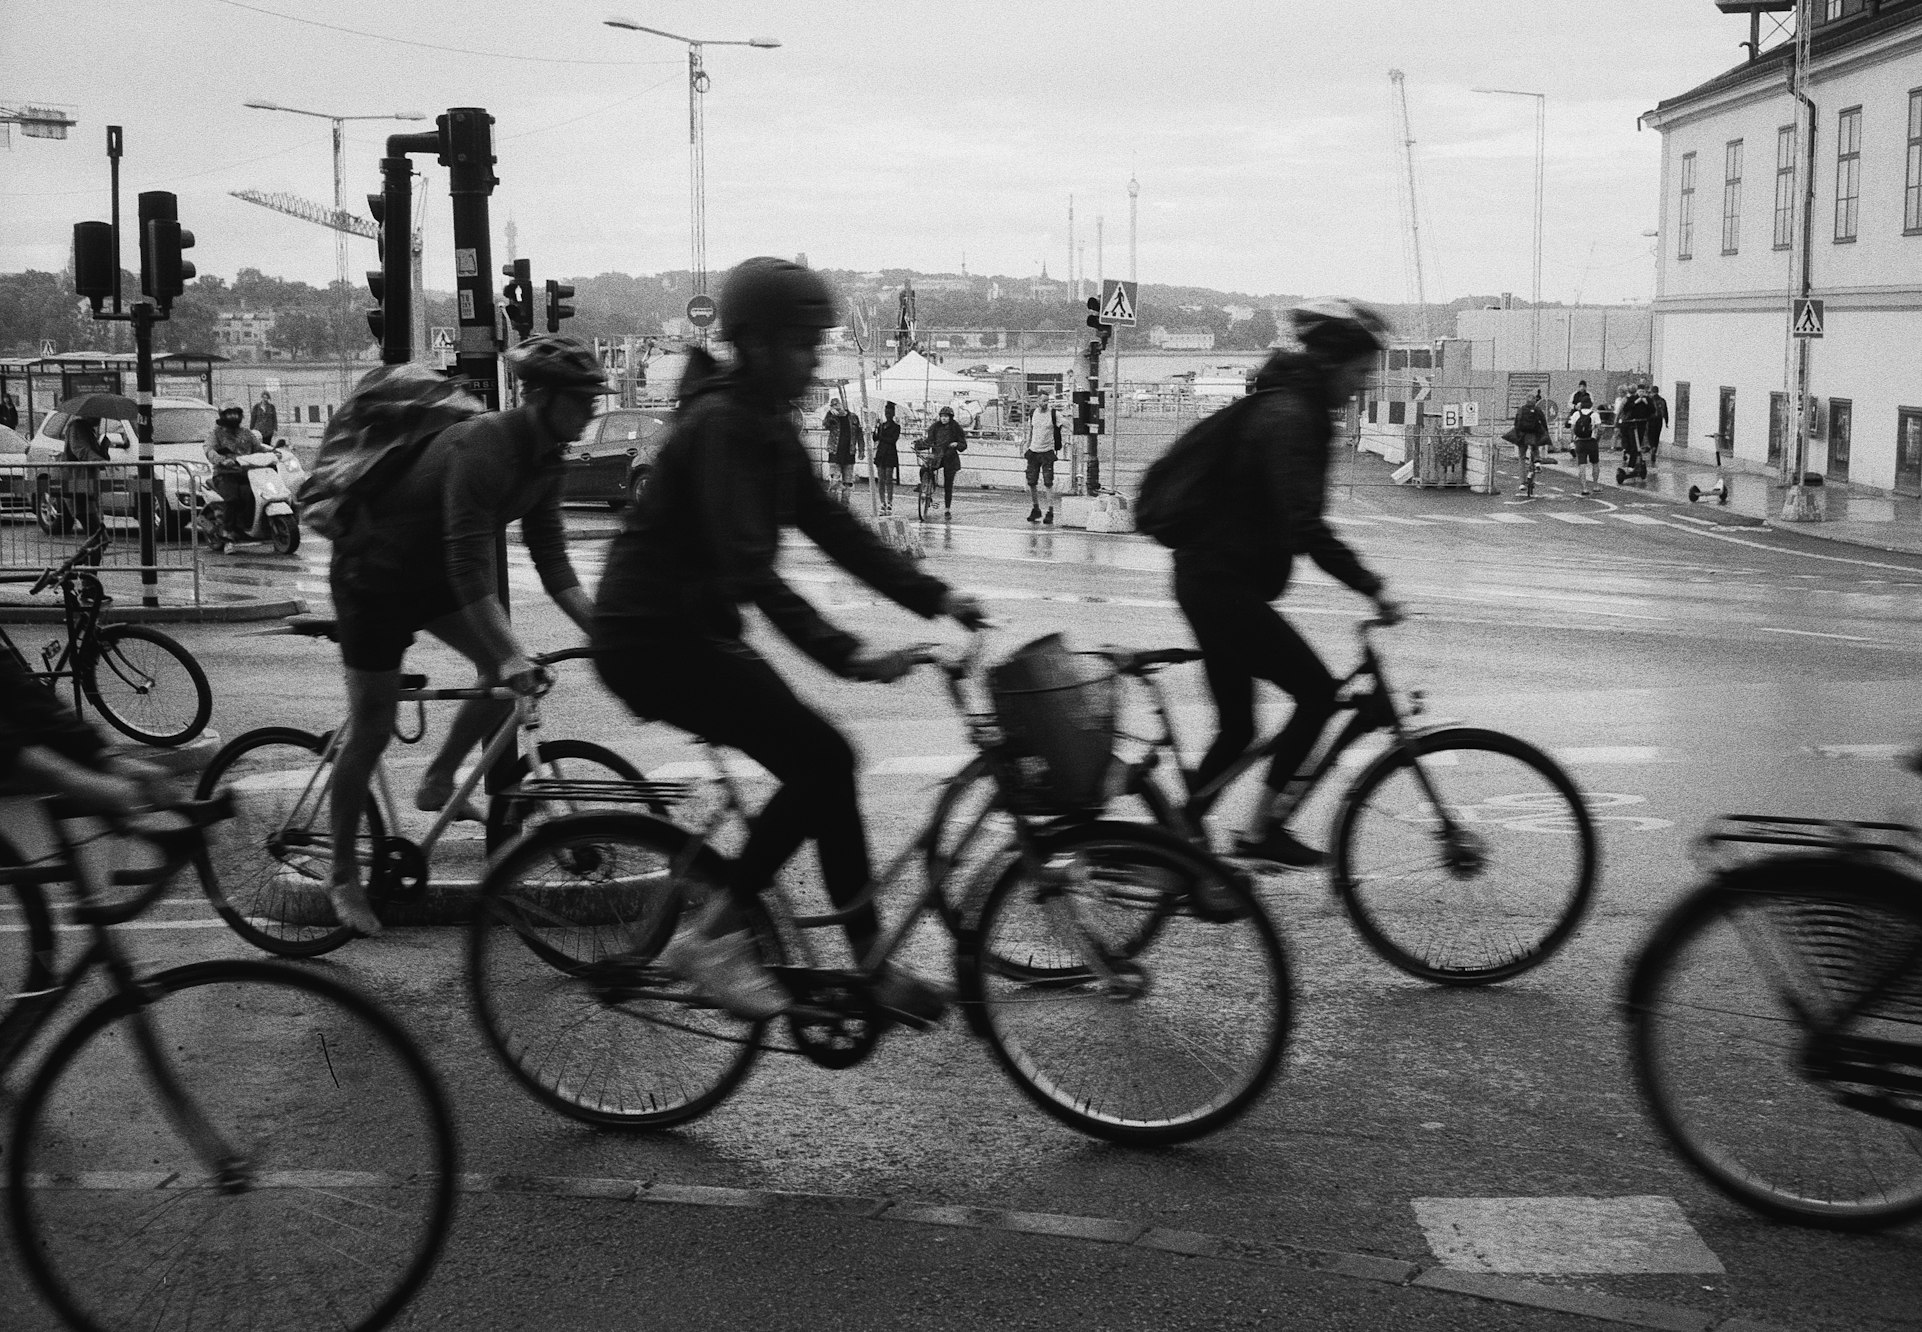 Photo by Gemma Evans - A grainy black and white image of several people cycling in Stockholm Sweden